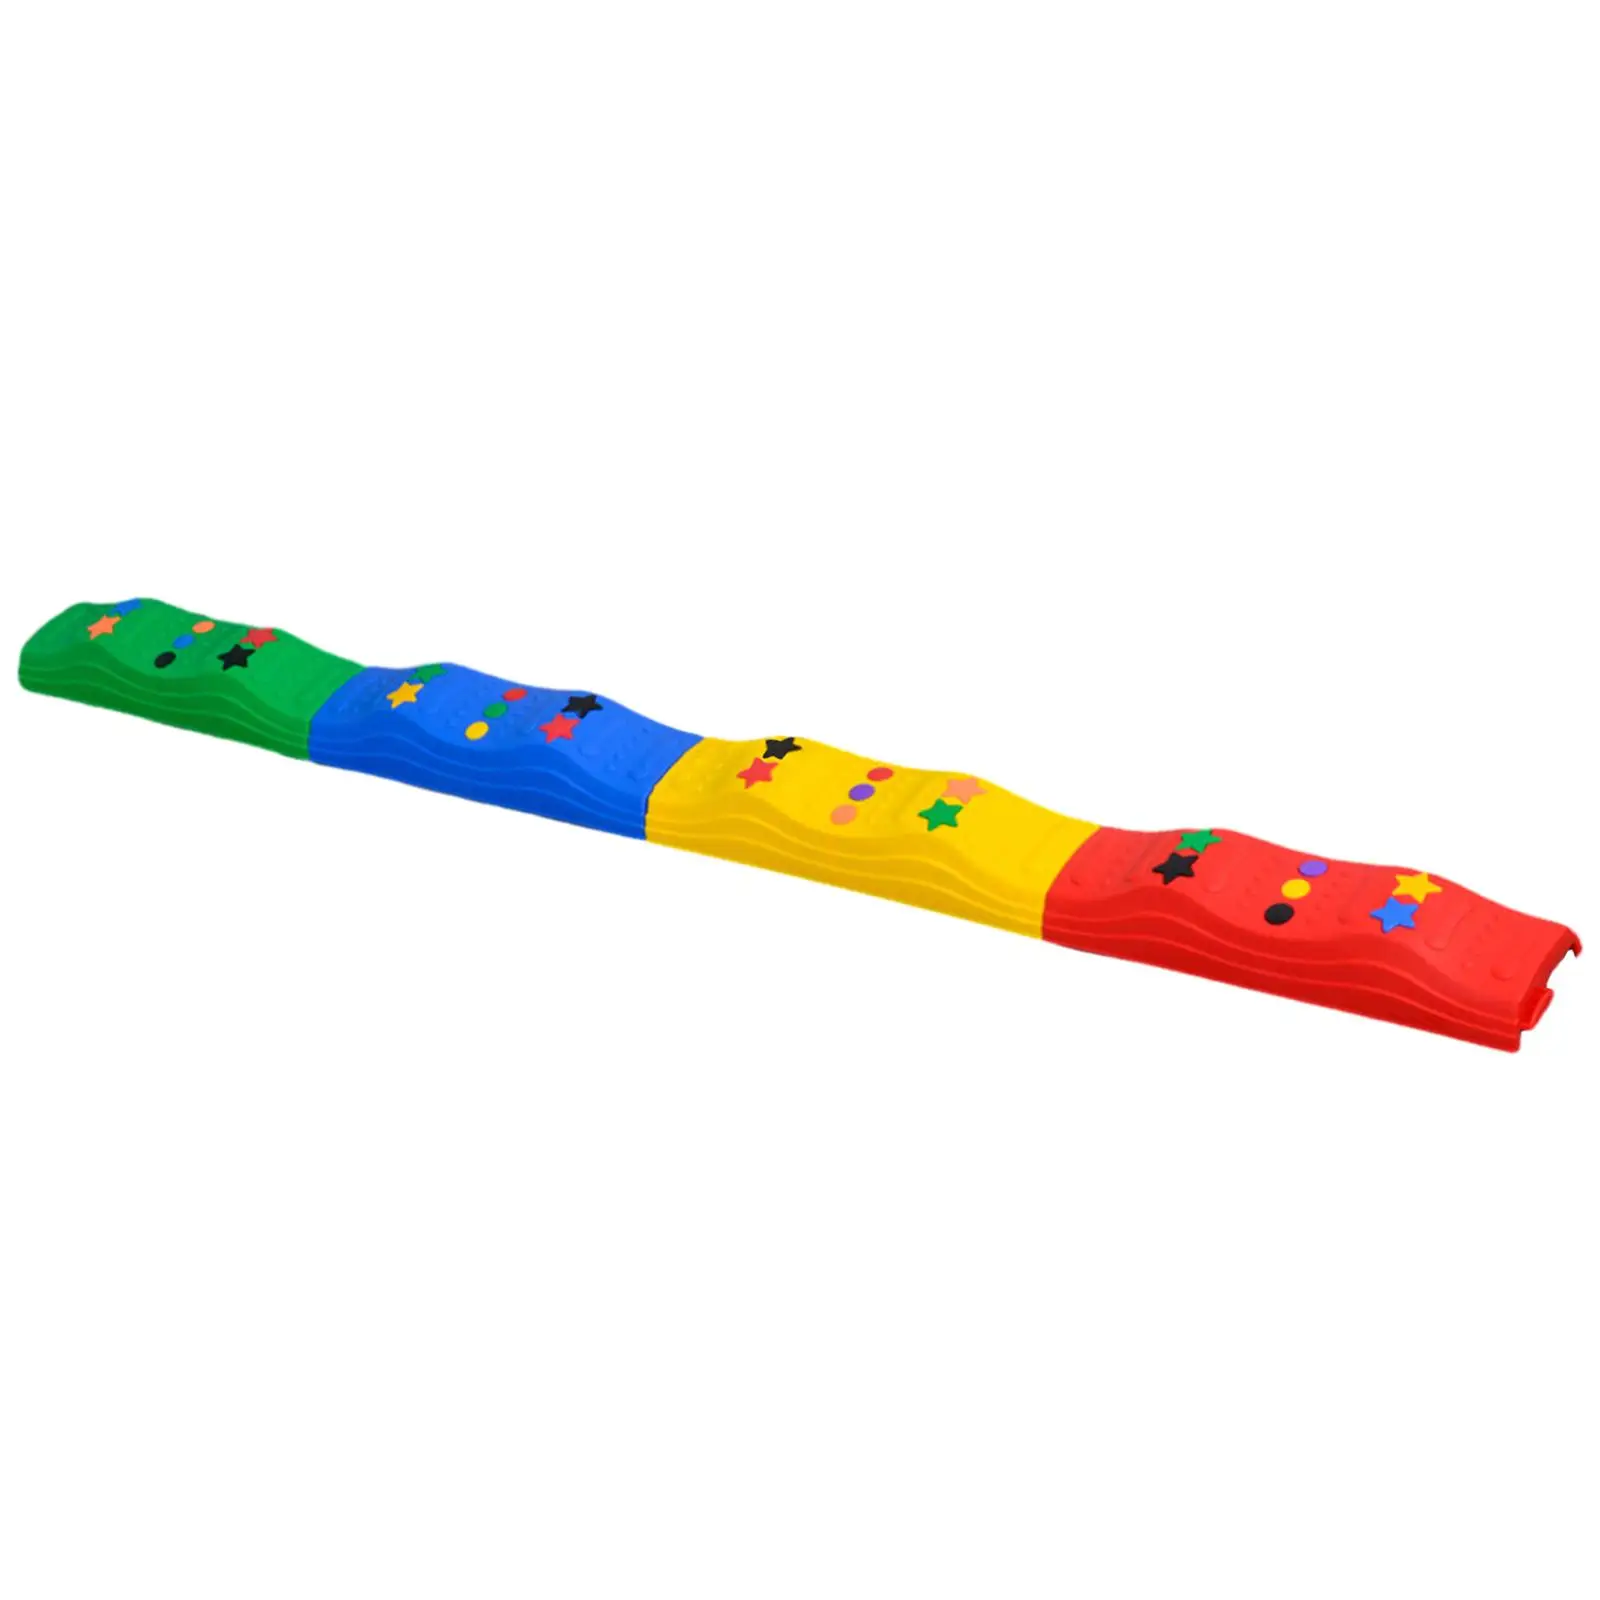 Colored Balance Beams for Kids Promote Balance Strength Coordination Anit Skid Physical Sensory Play Children Obstacle Course